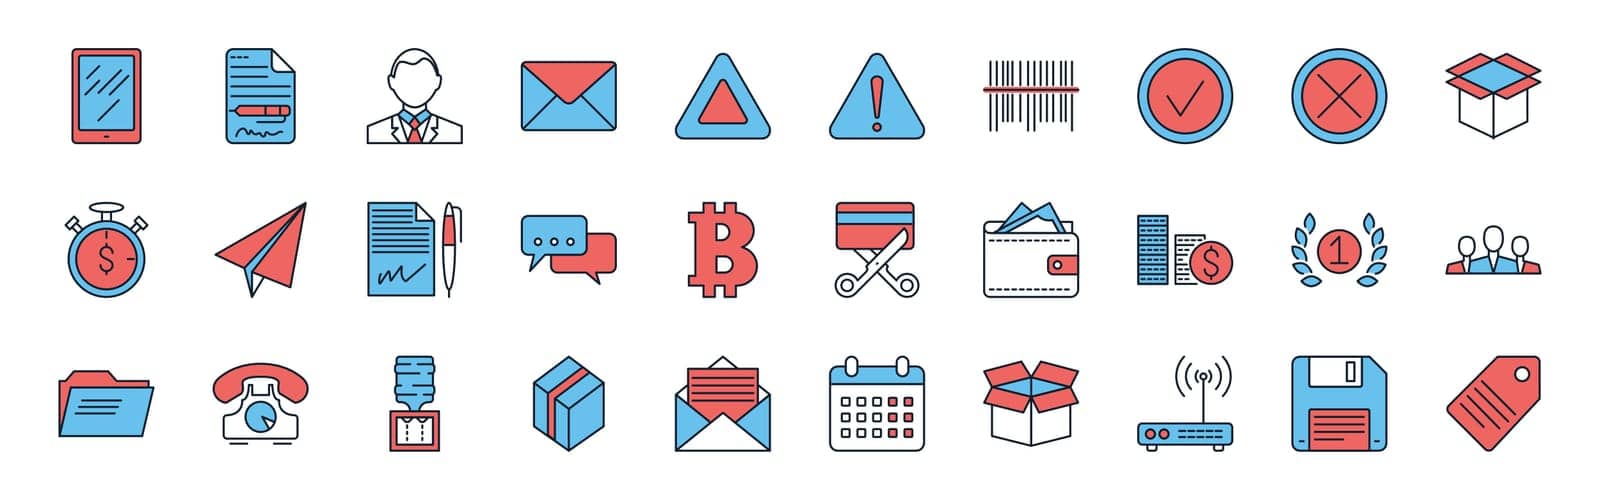 Set vector business, banking and finance icons by smoki